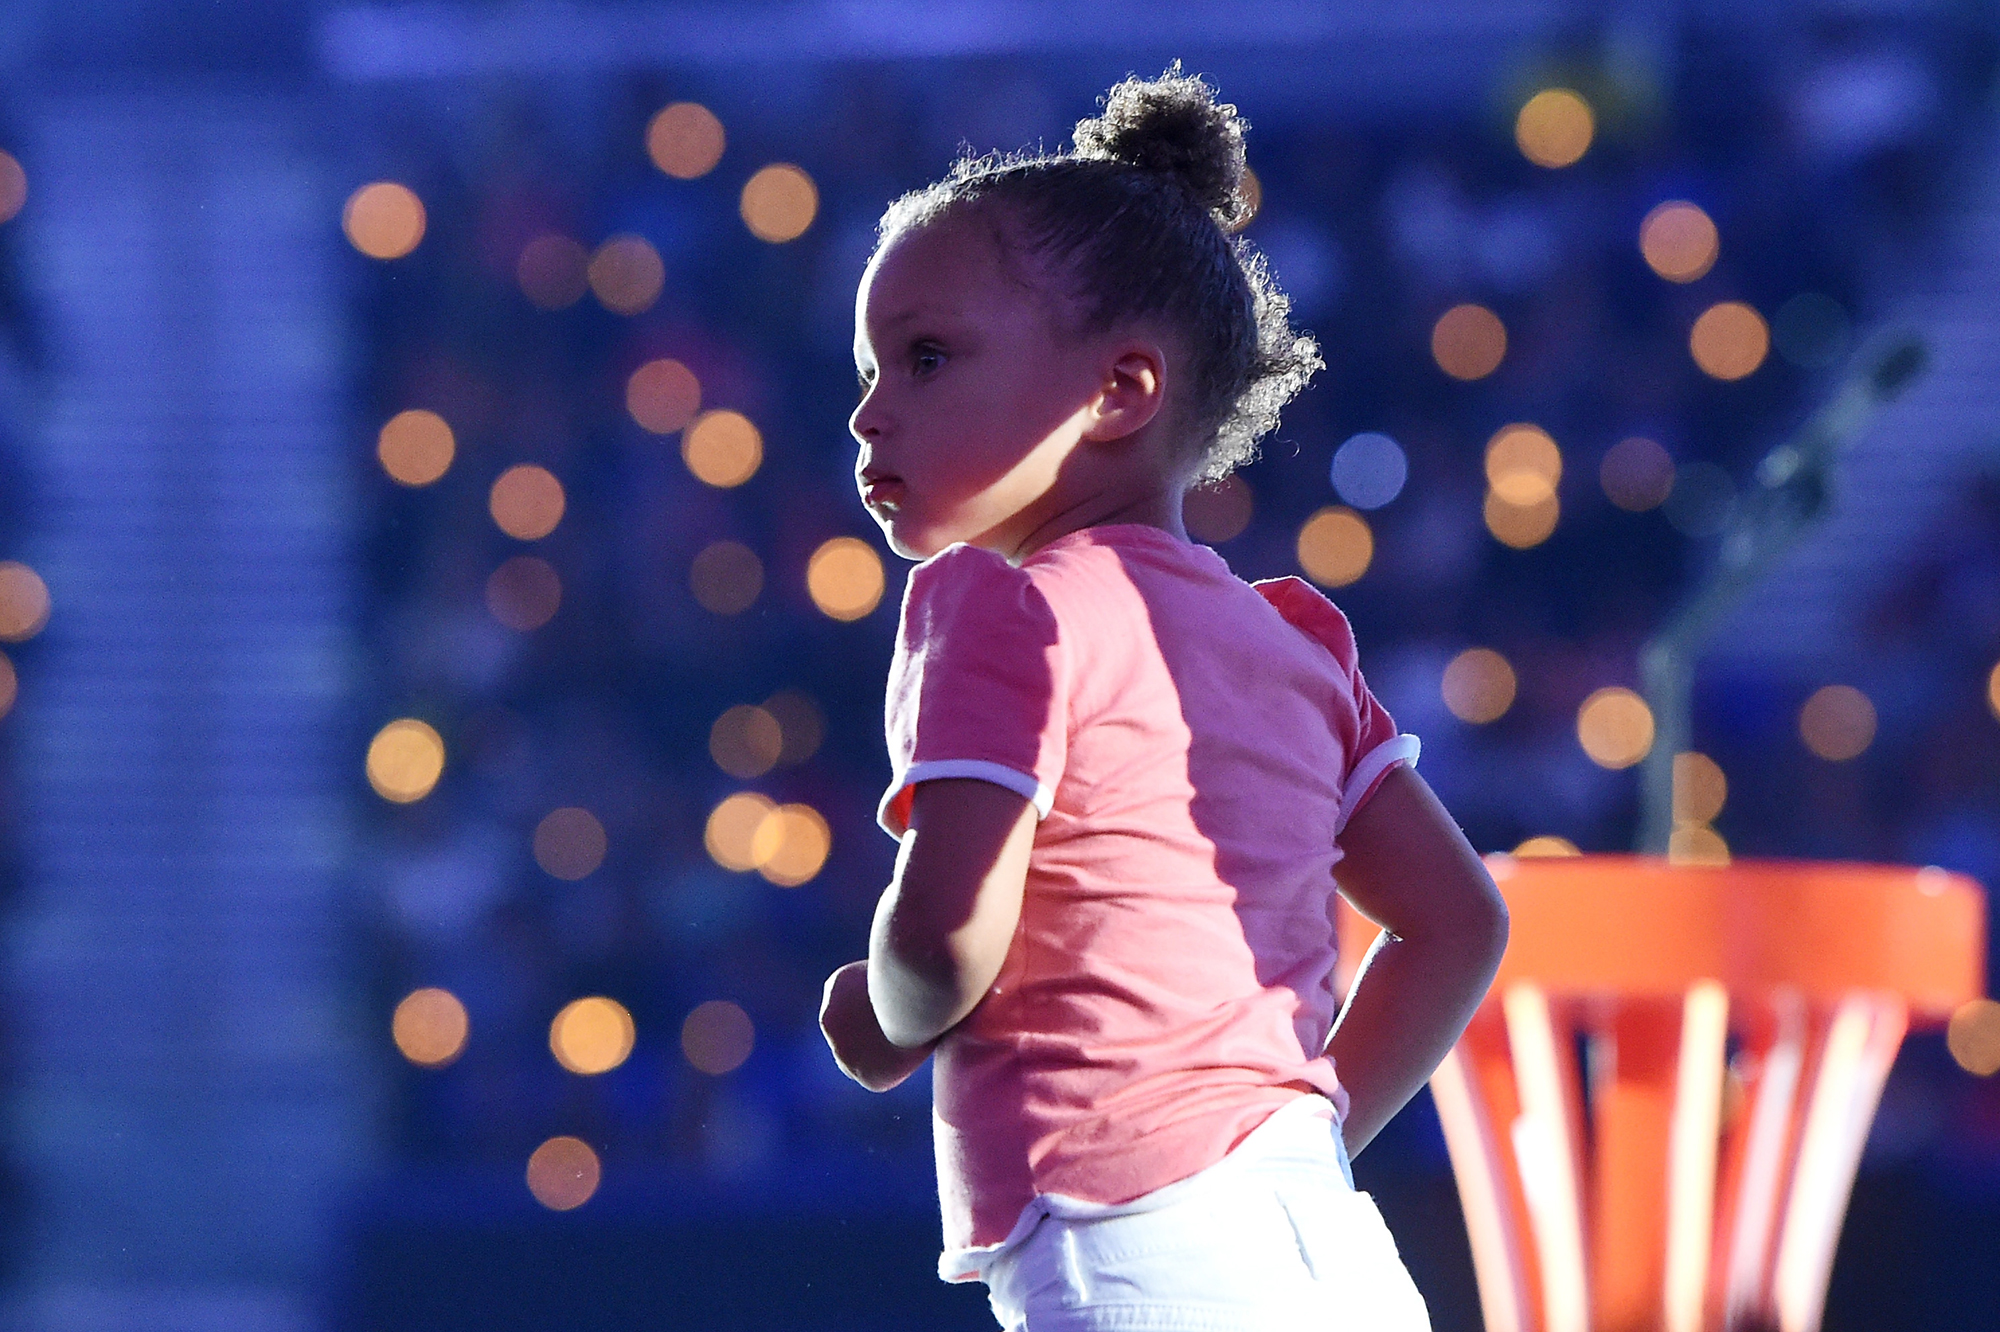 Stephen Curry's Daughter Looks All Grown Up at Basketball Game: Photo